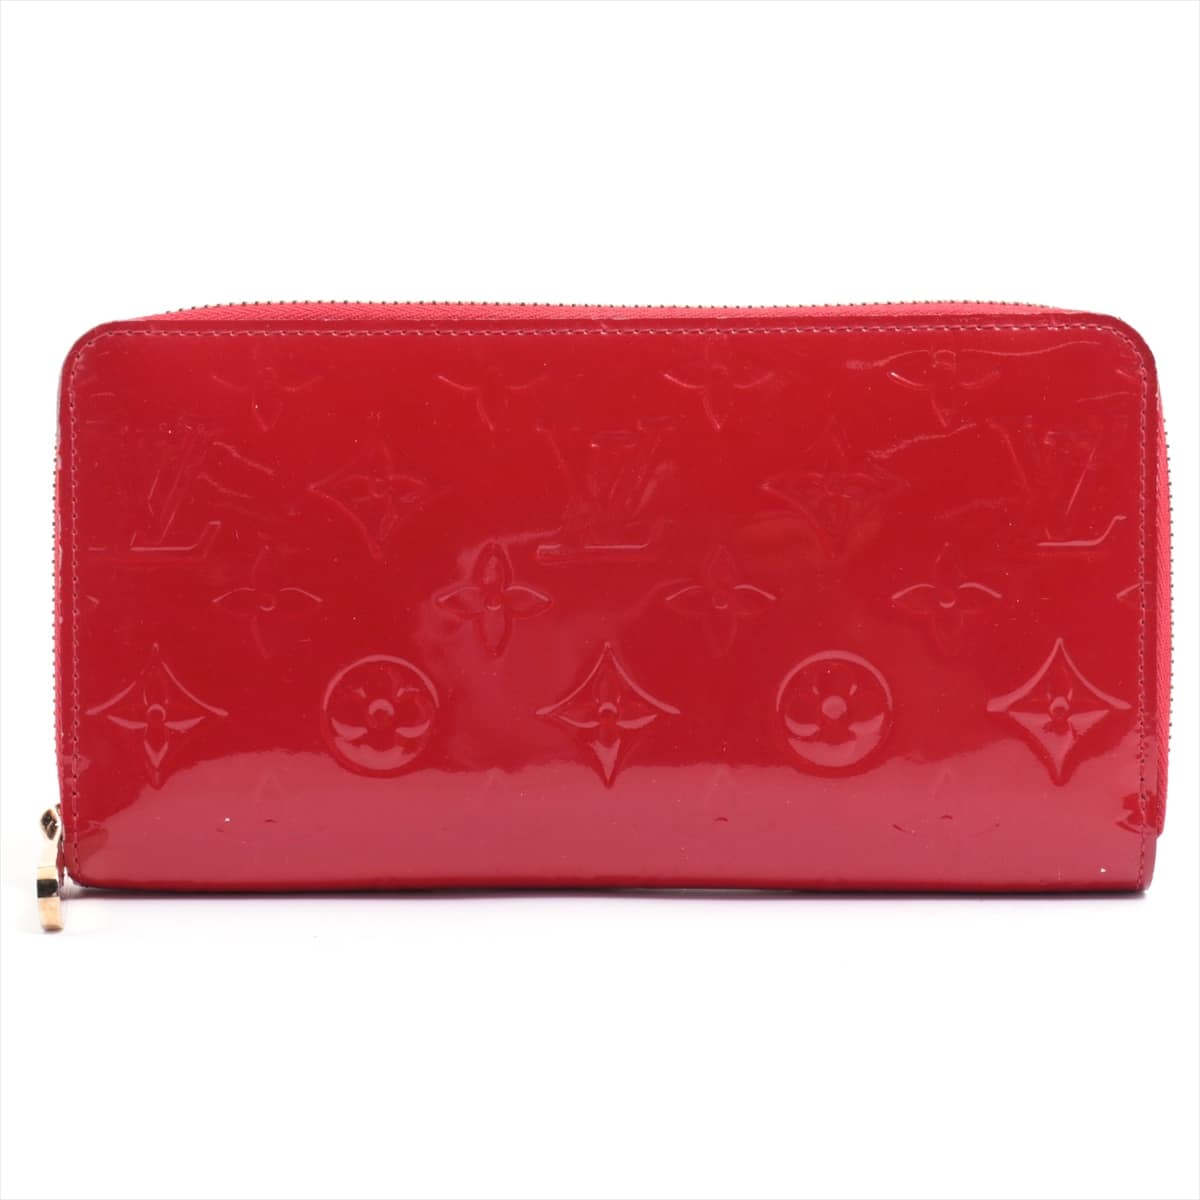 Louis Vuitton Vernis Zippy Wallet M90200 Cerise The coin purse is frayed on the zipper